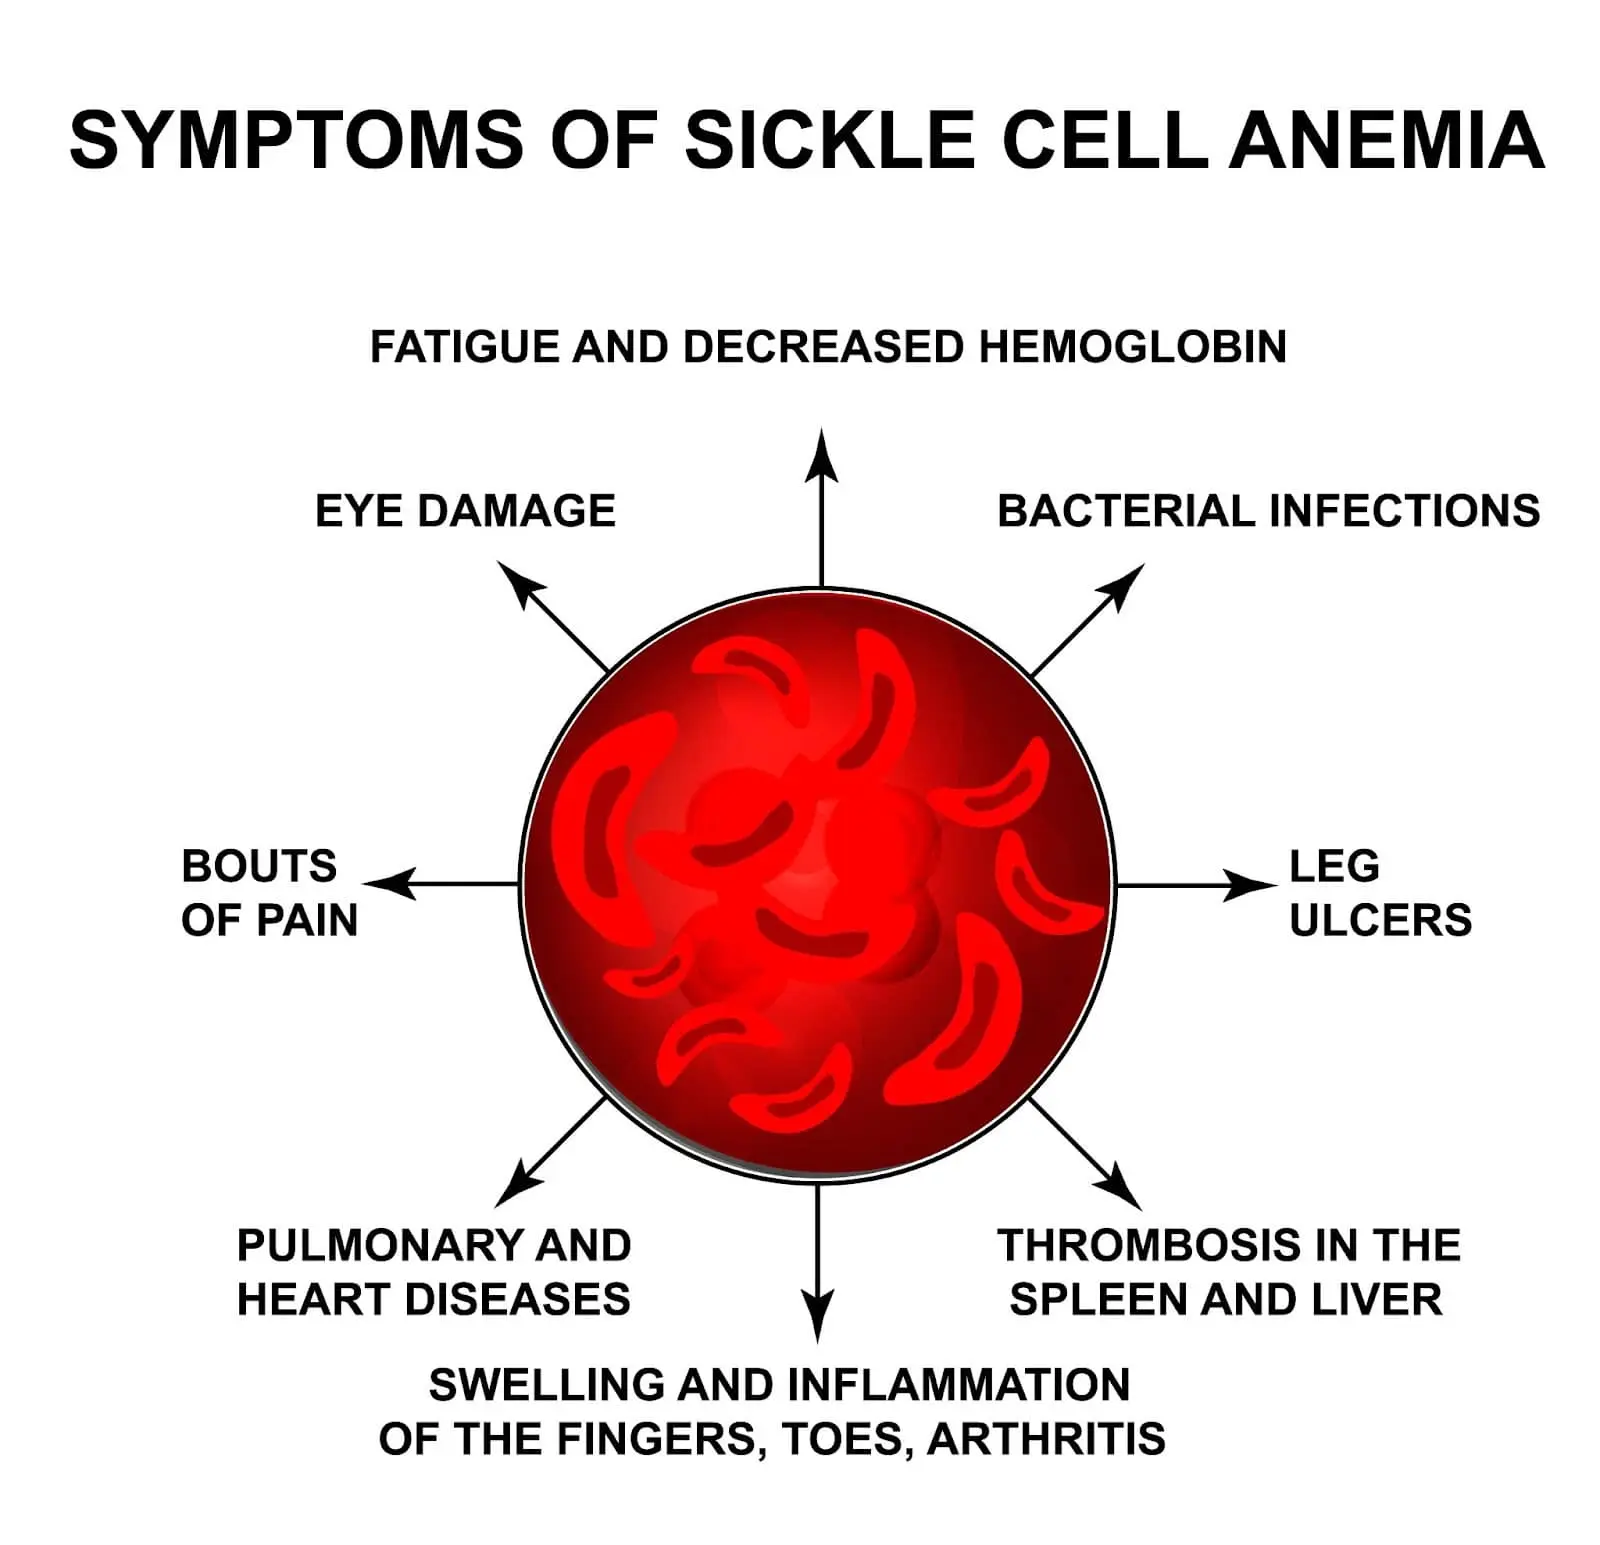 Symptoms of Sickle Cell Anemia